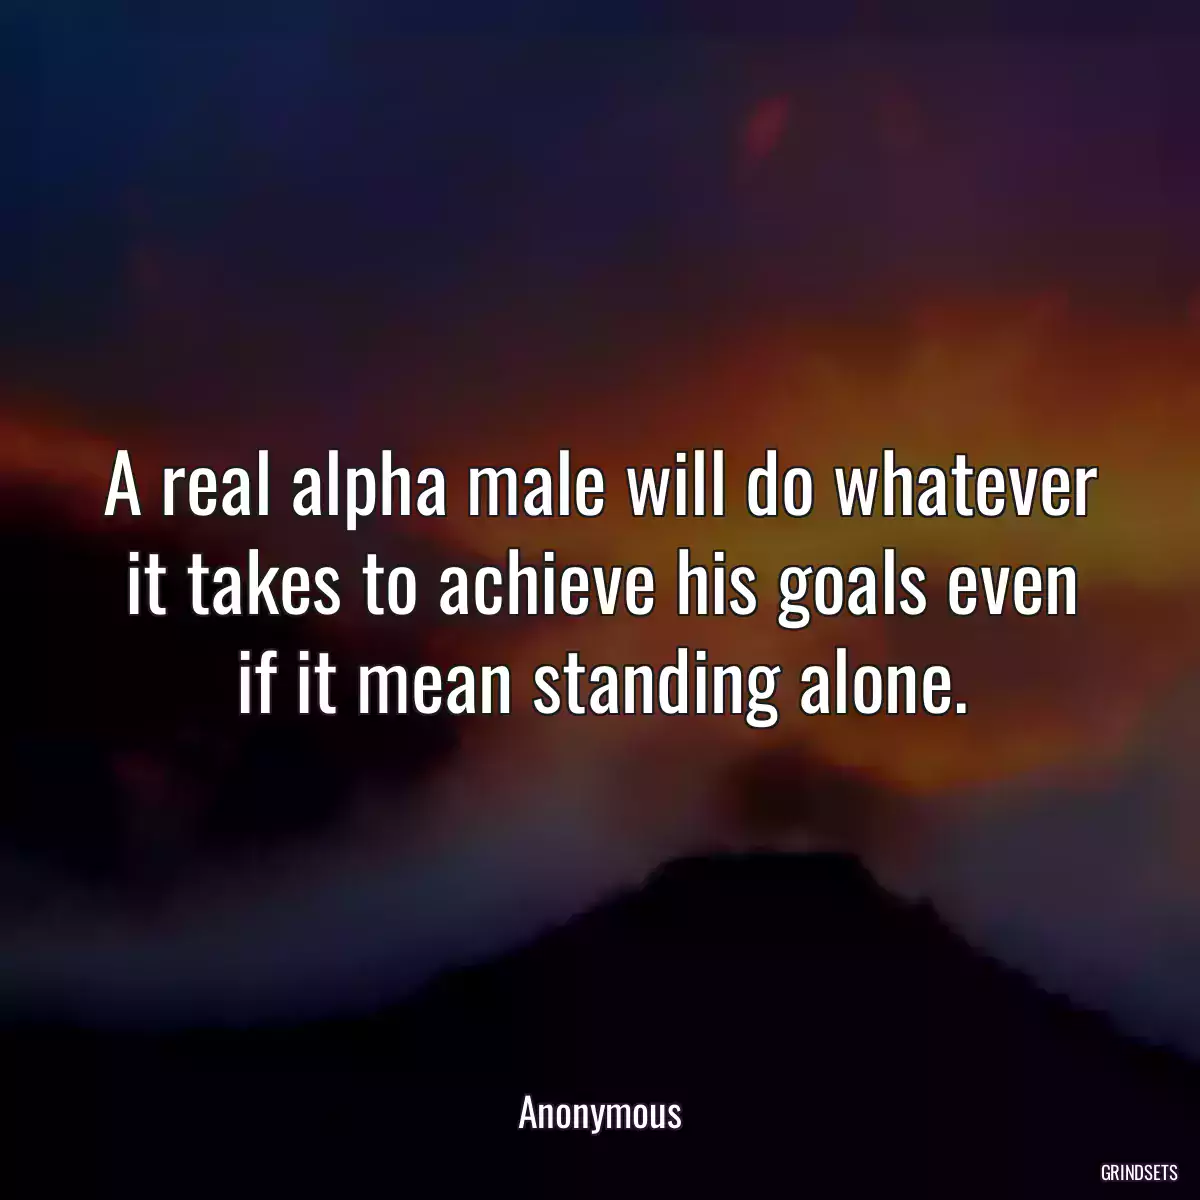 A real alpha male will do whatever it takes to achieve his goals even if it mean standing alone.